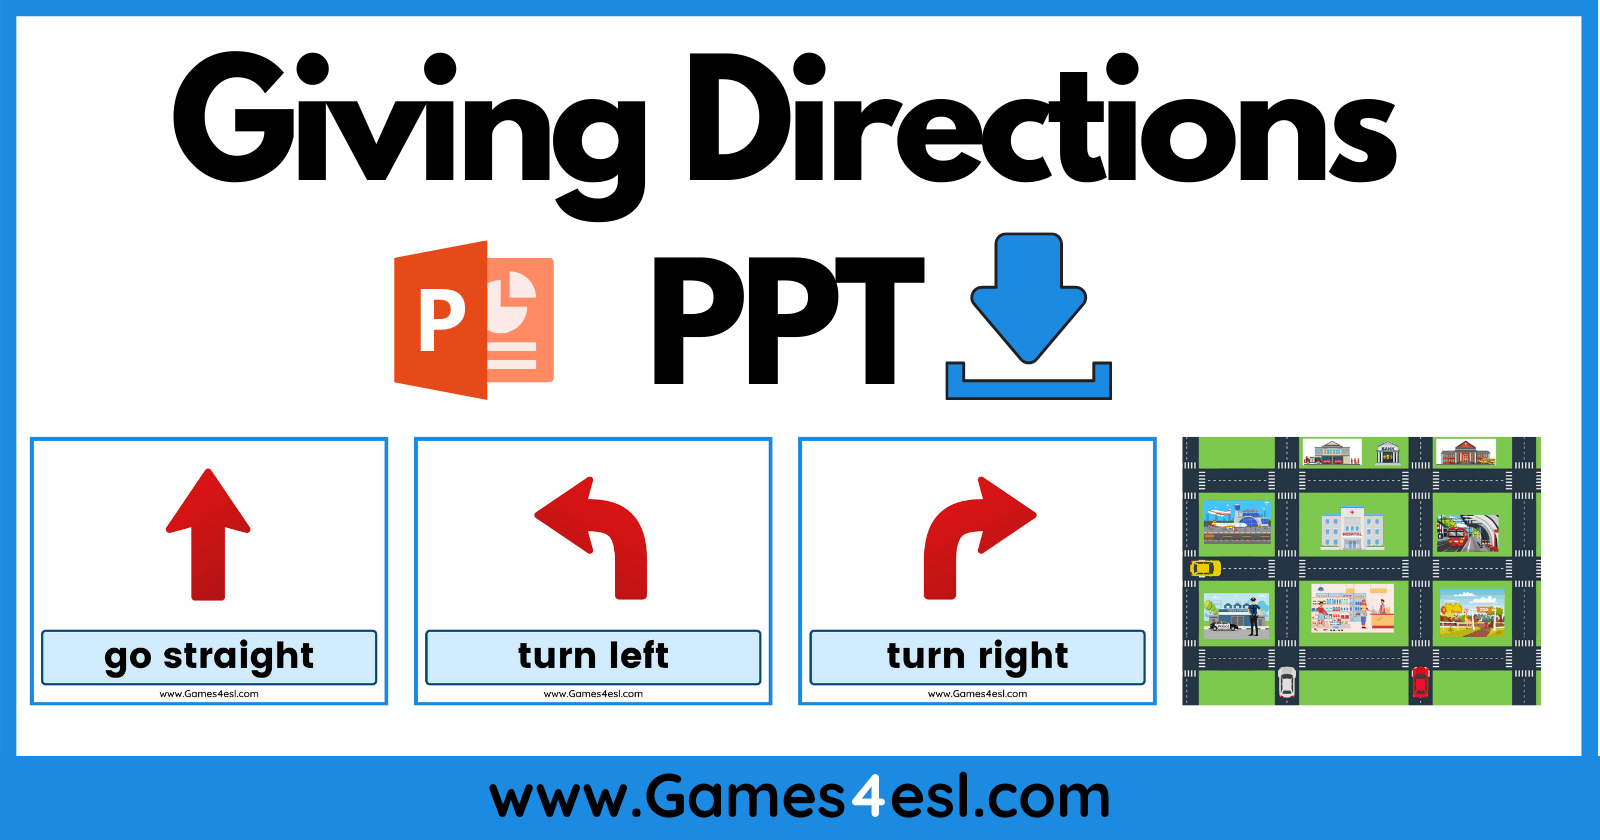 Giving Directions PPT  Games22esl Within Following Directions Worksheet Kindergarten